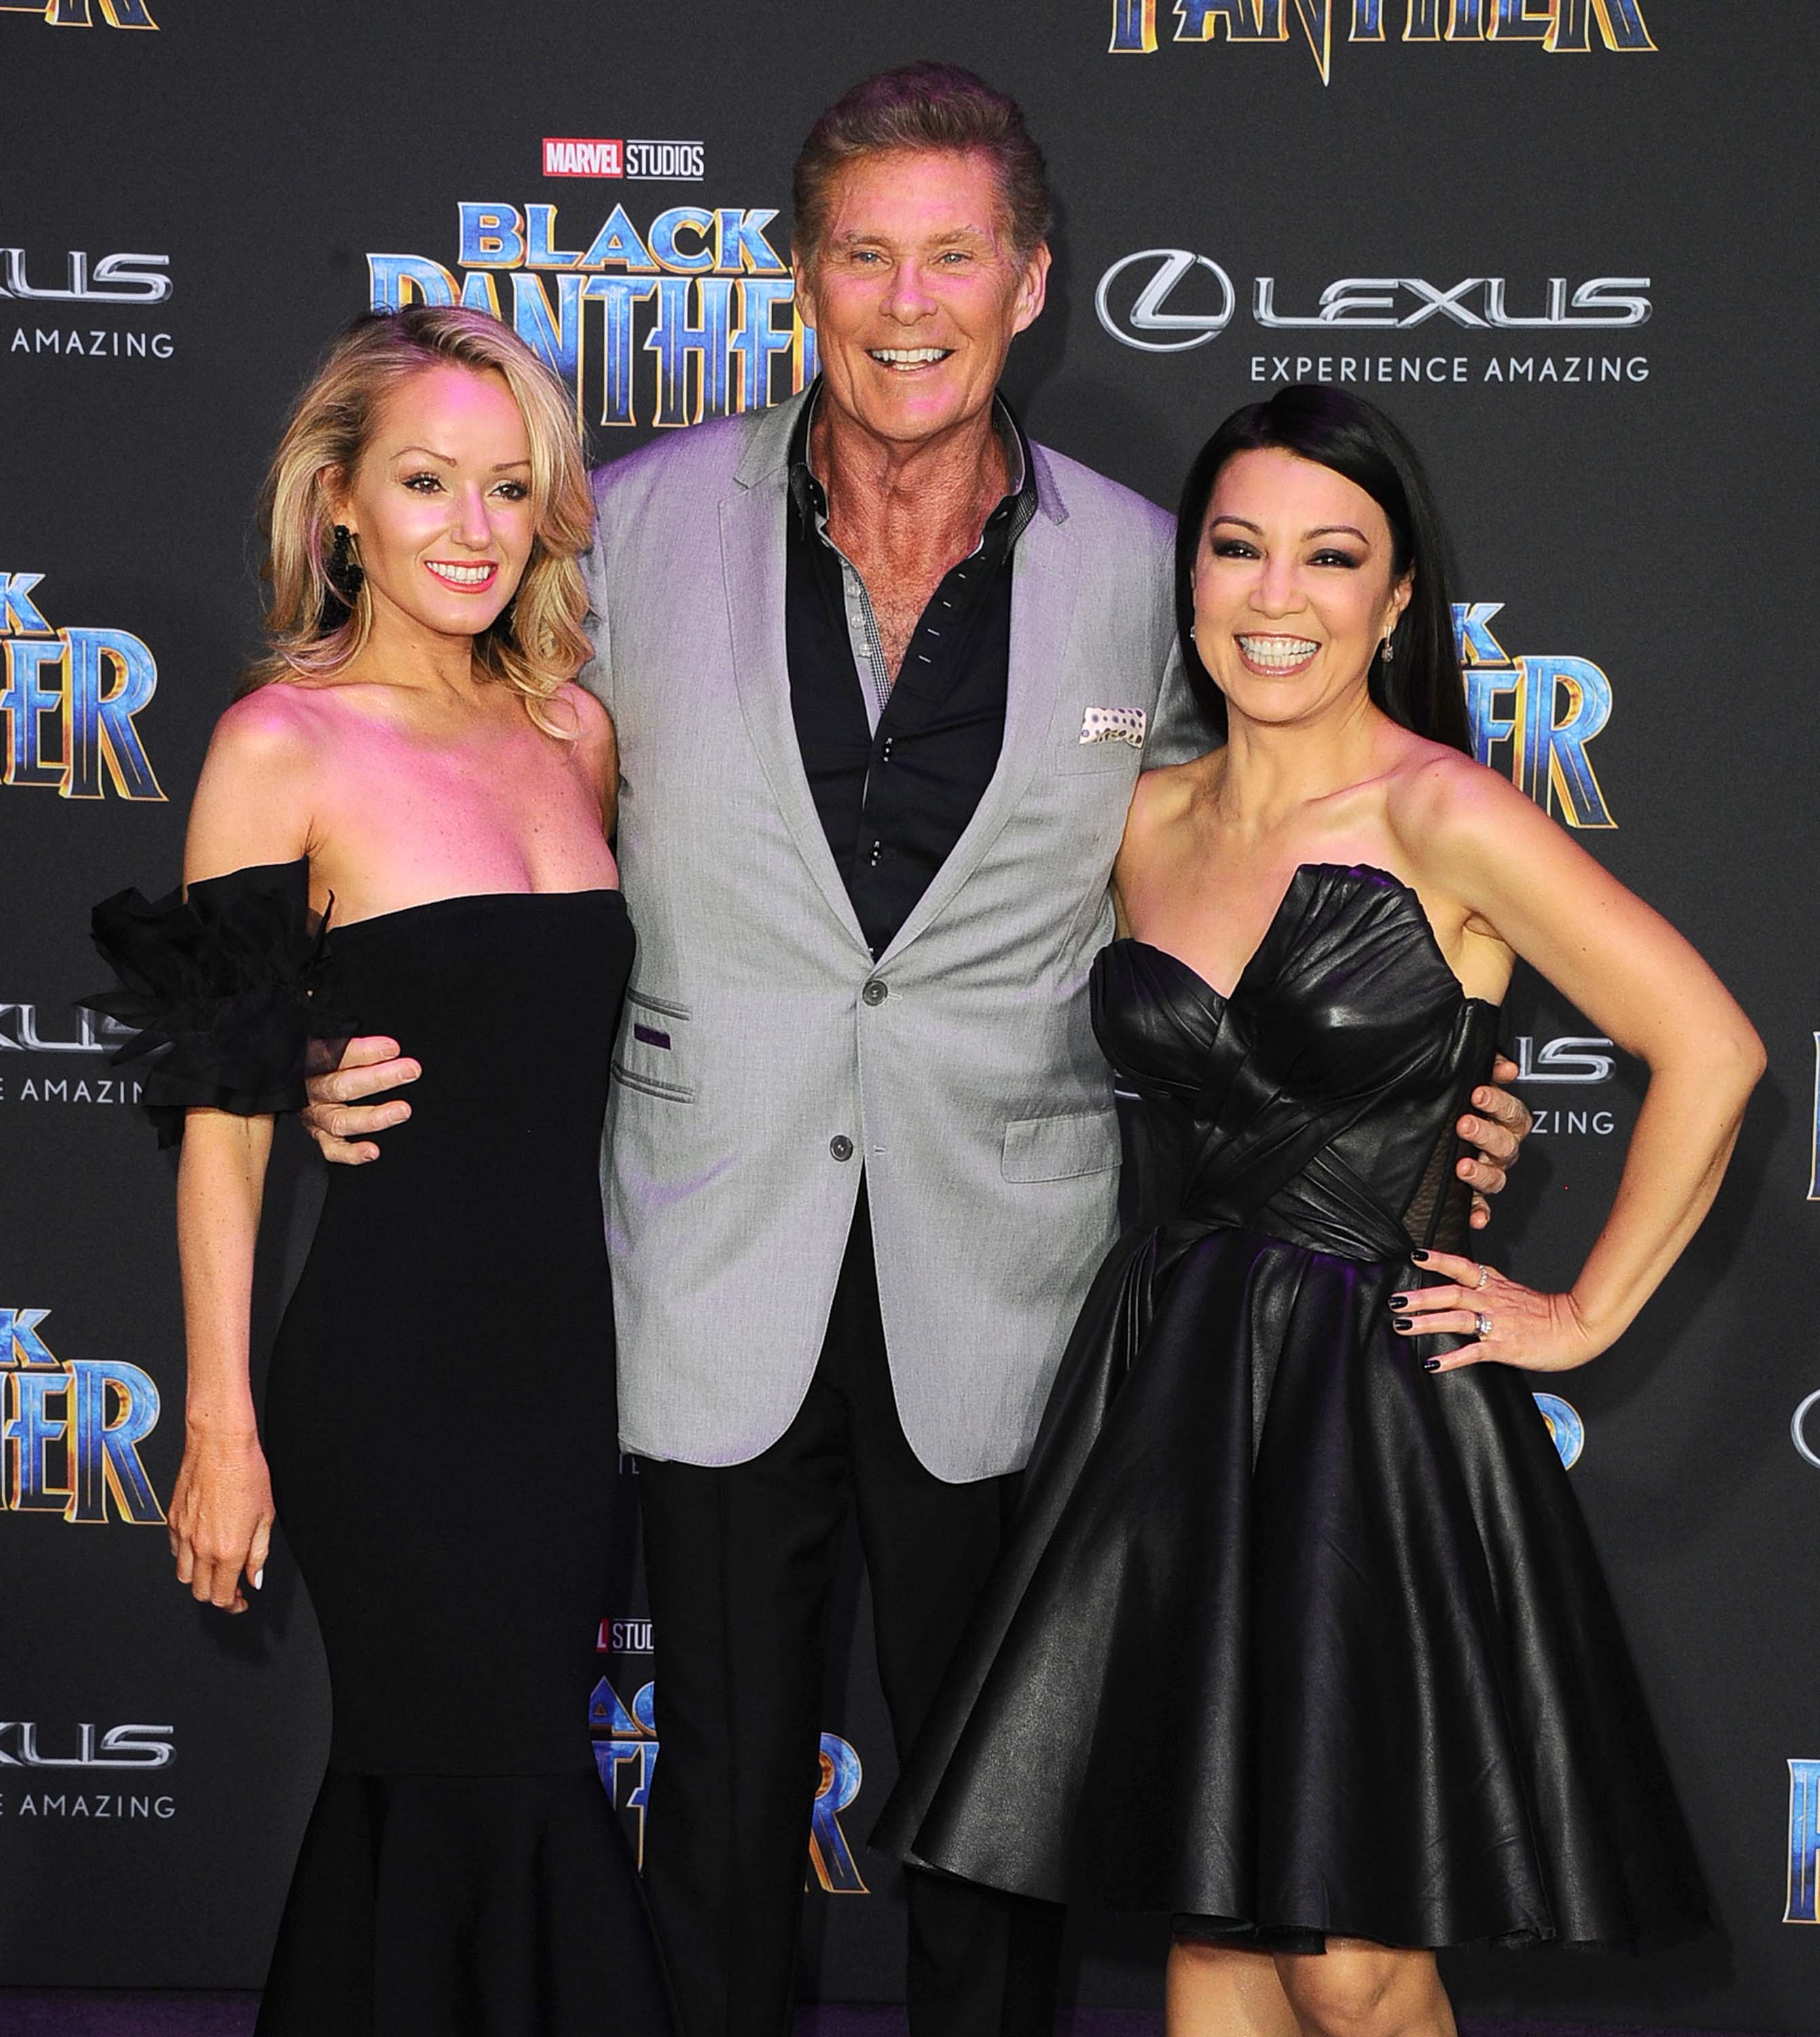 Ming-Na Wen attends Black Panther premiere